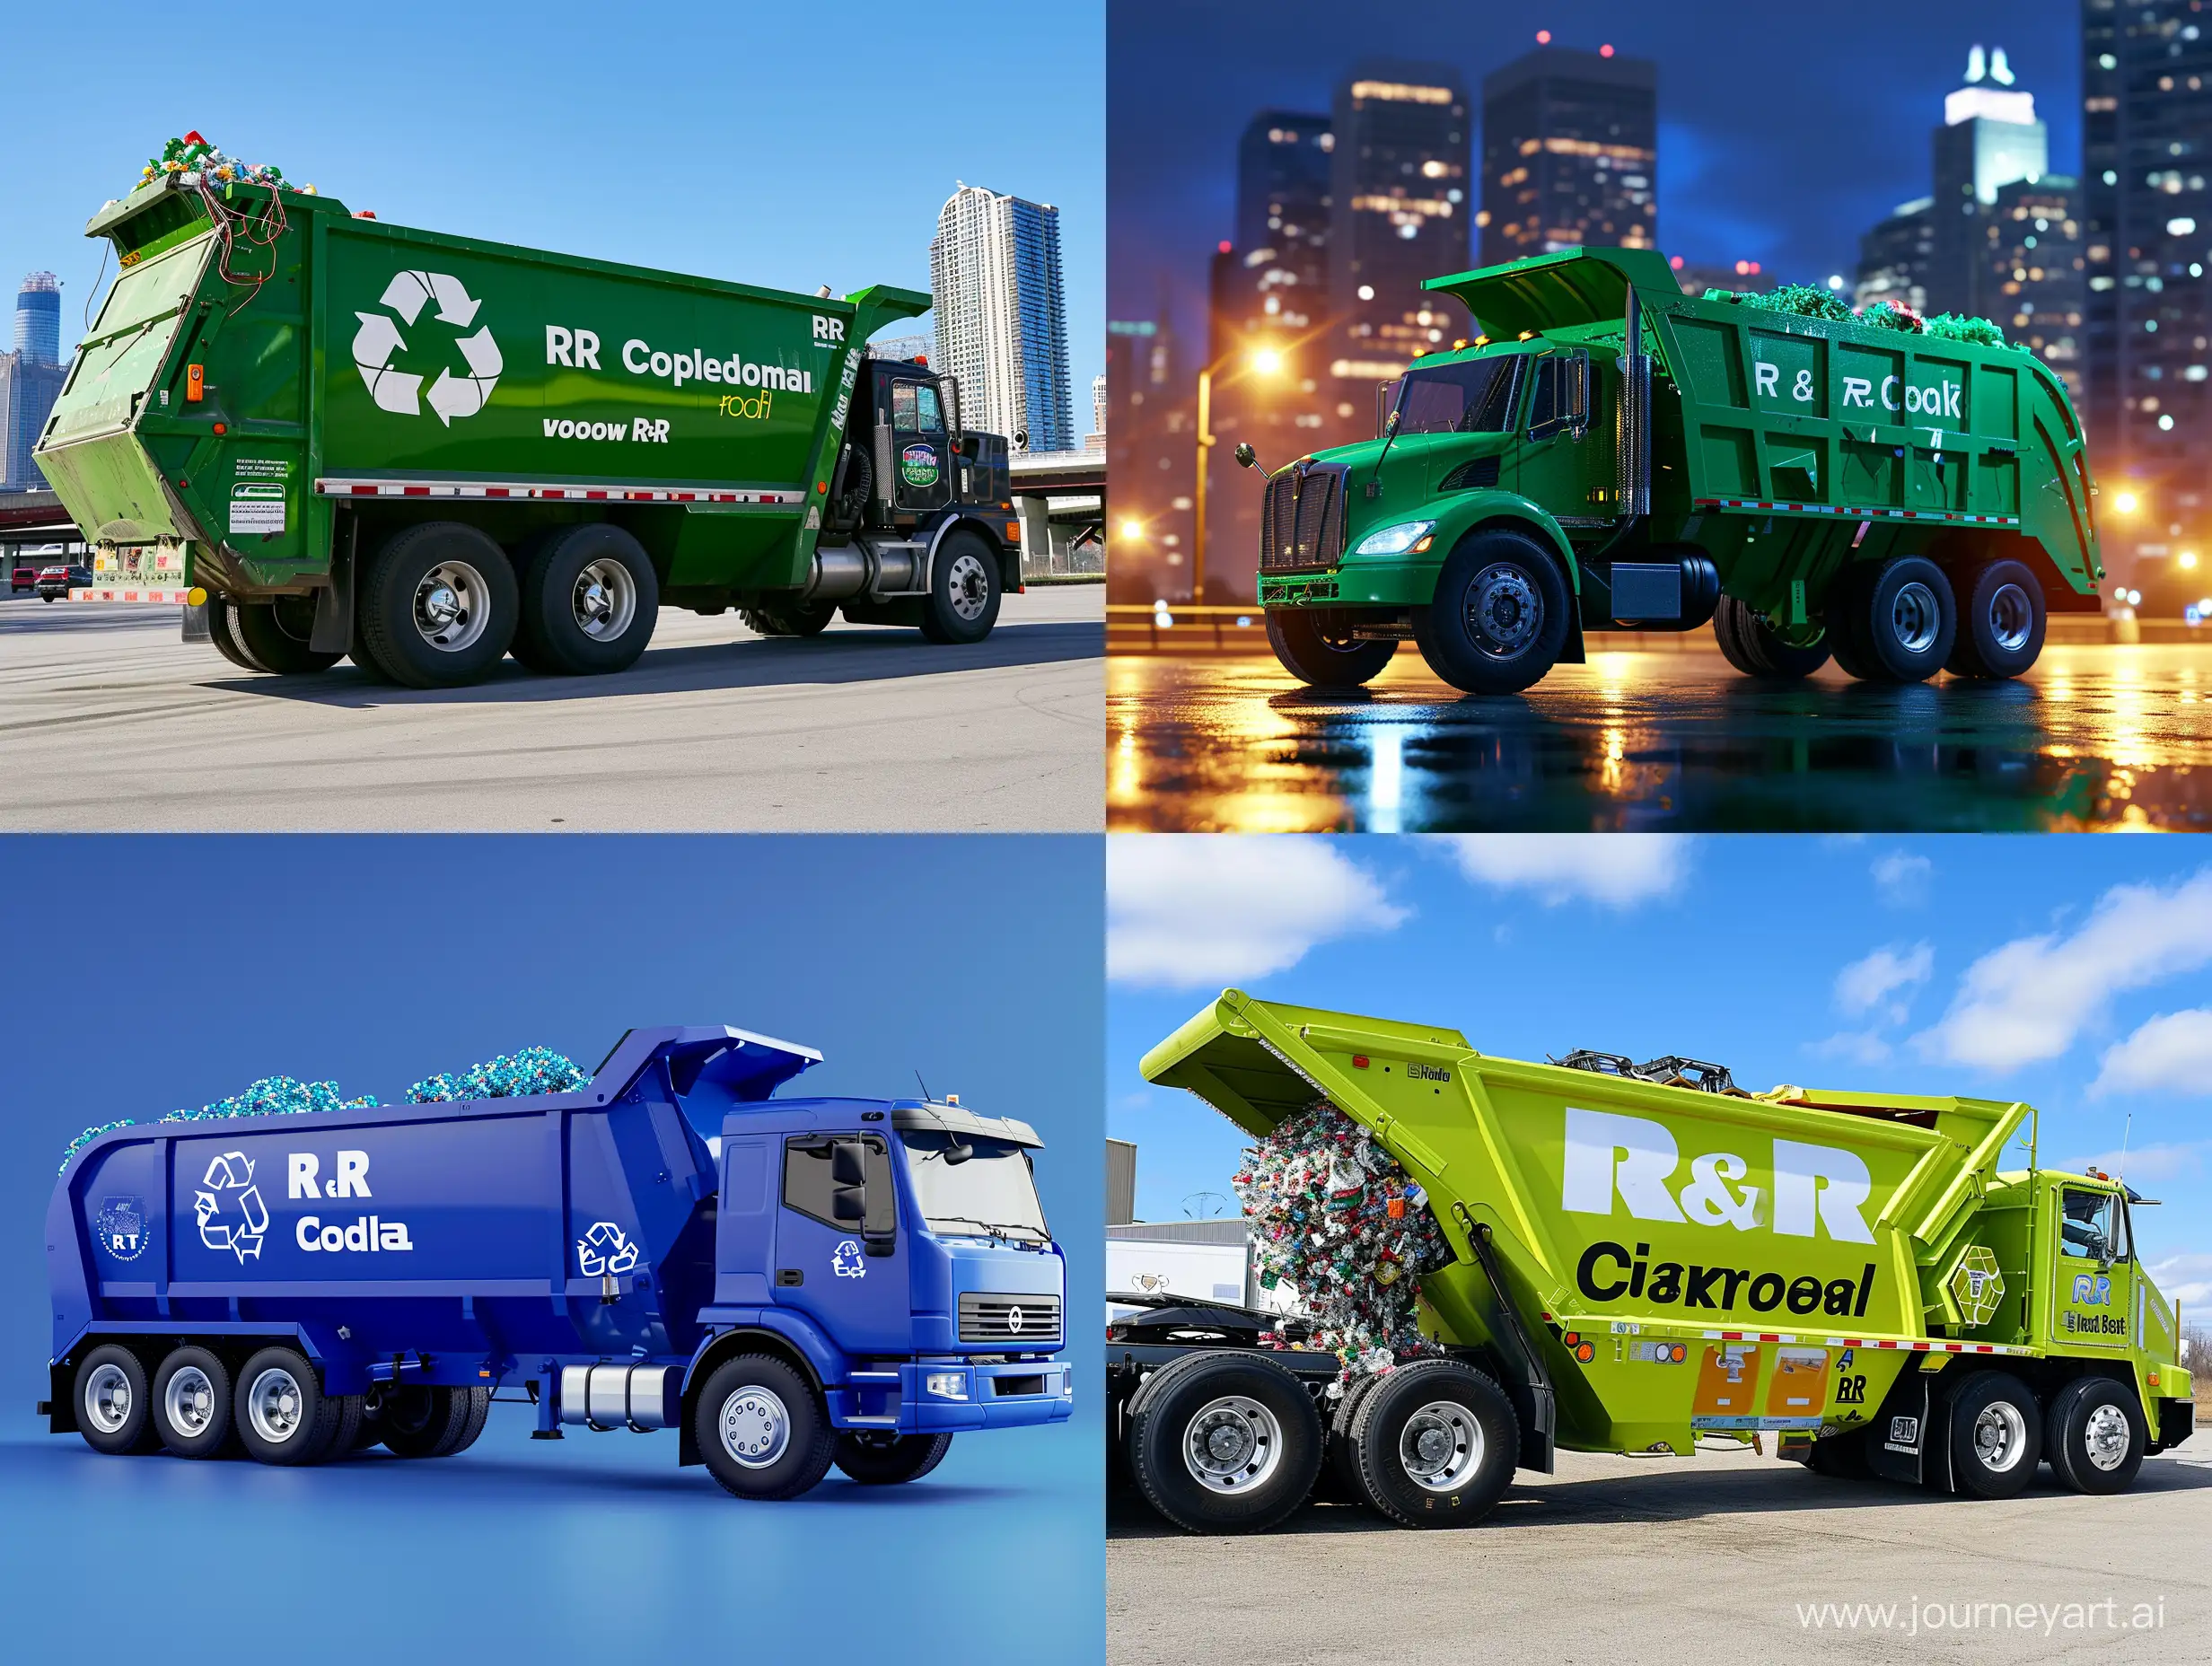 Cyber City Background,  R&R Recycling Food waste compony, recycling truck